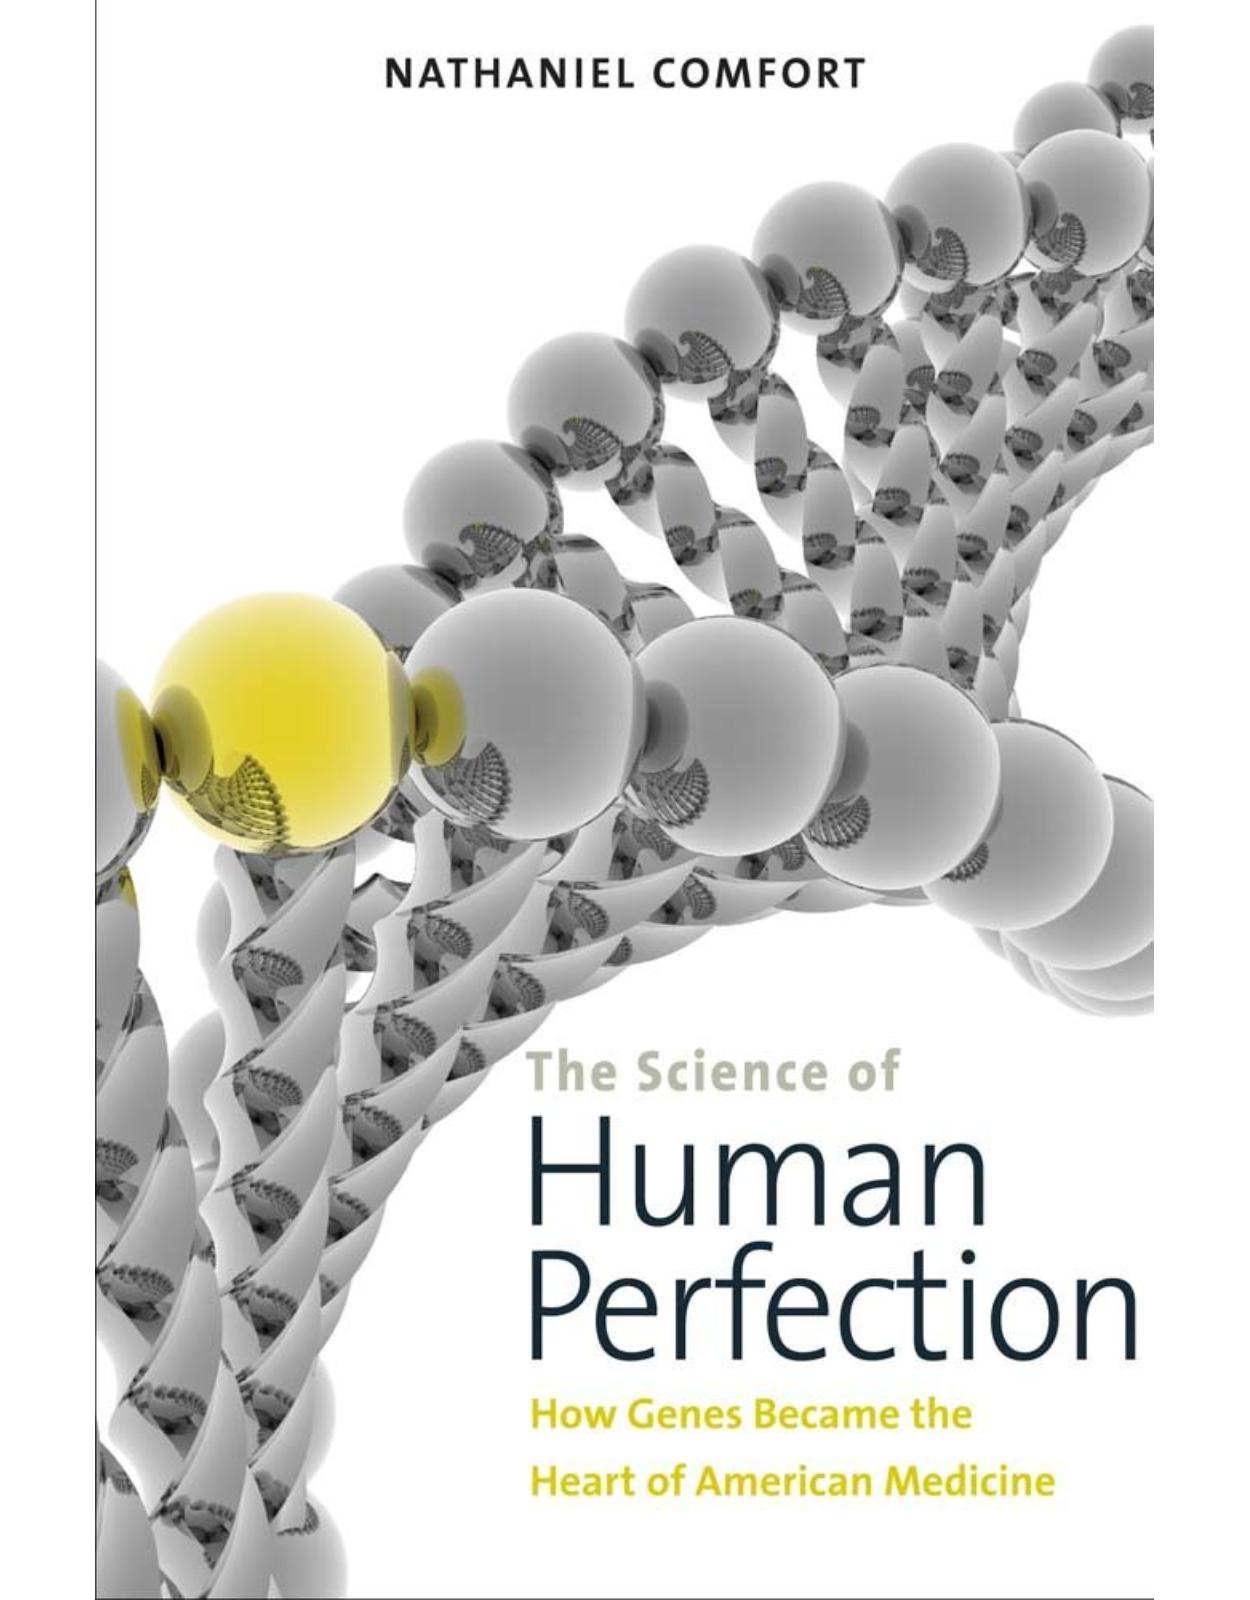 Science of Human Perfection. Heredity, Health, and Human Improvement in American Biomedicine